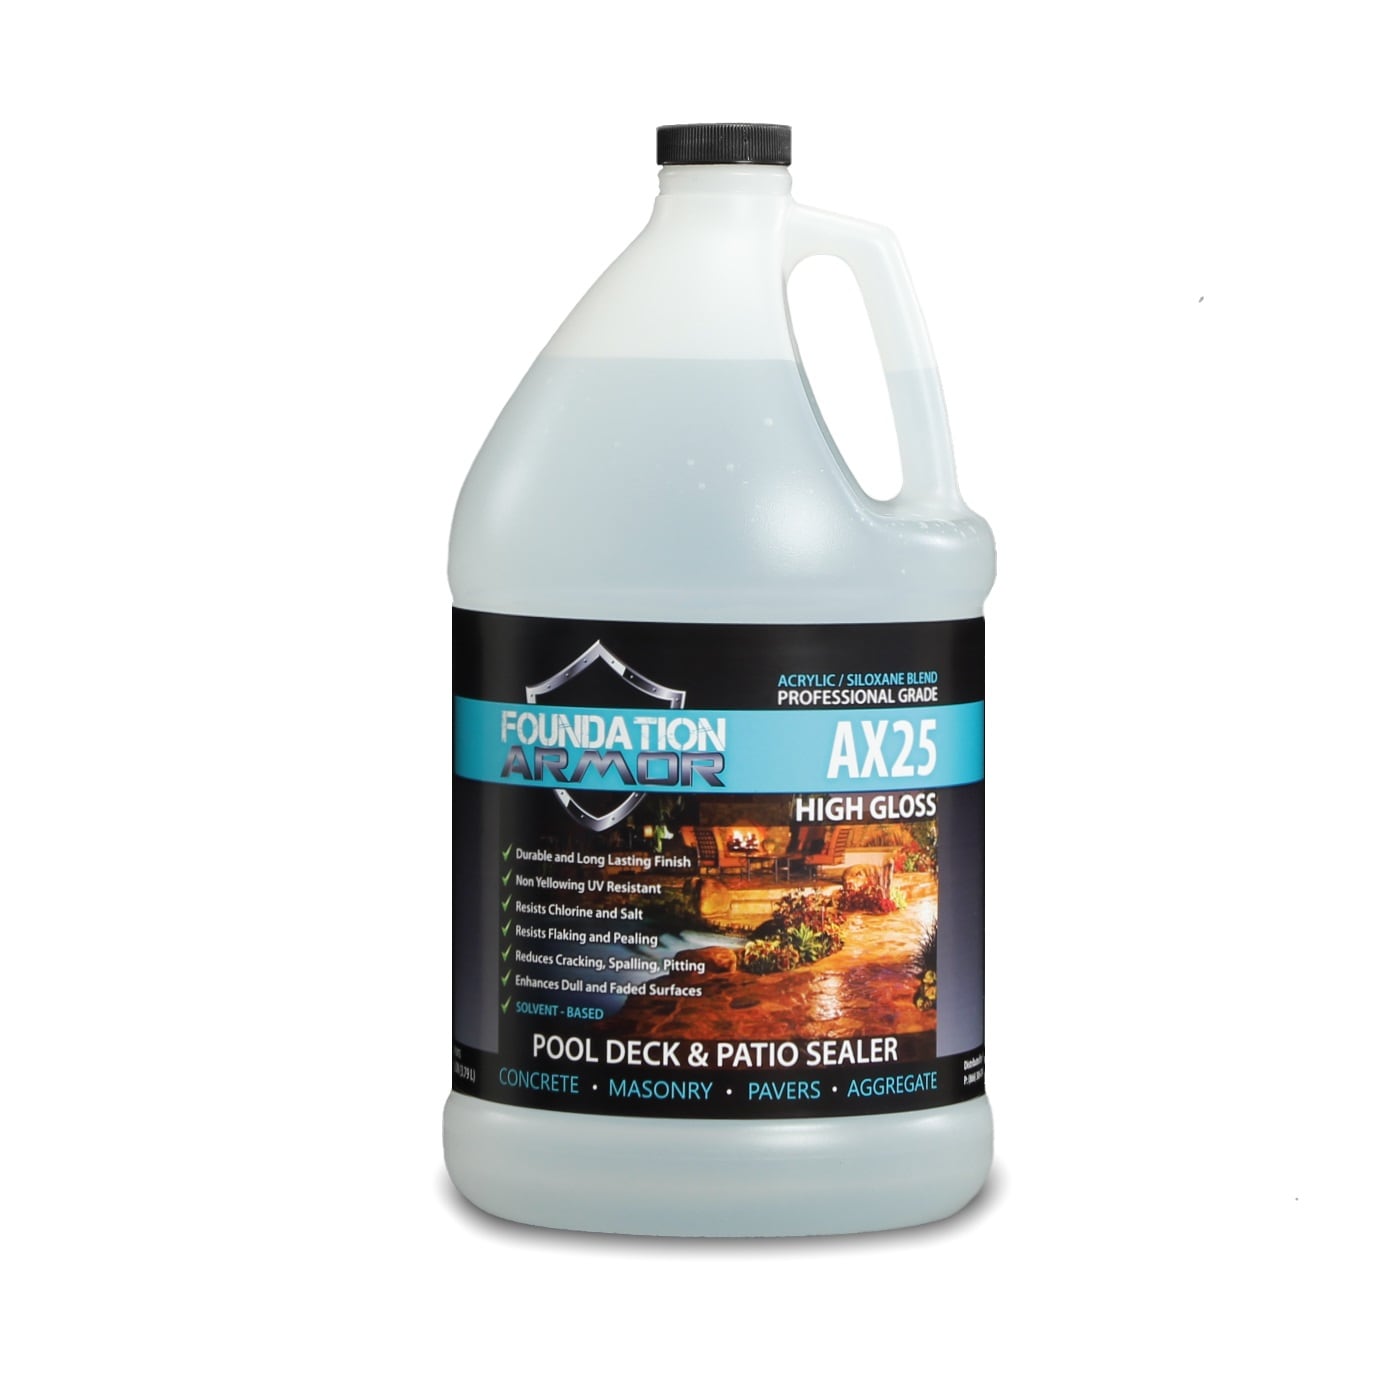 Seal Krete CLEAR-SEAL Urethane Acrylic Protective Sealer - Gloss Finish -  GALLON - Southern Paint & Supply Co.